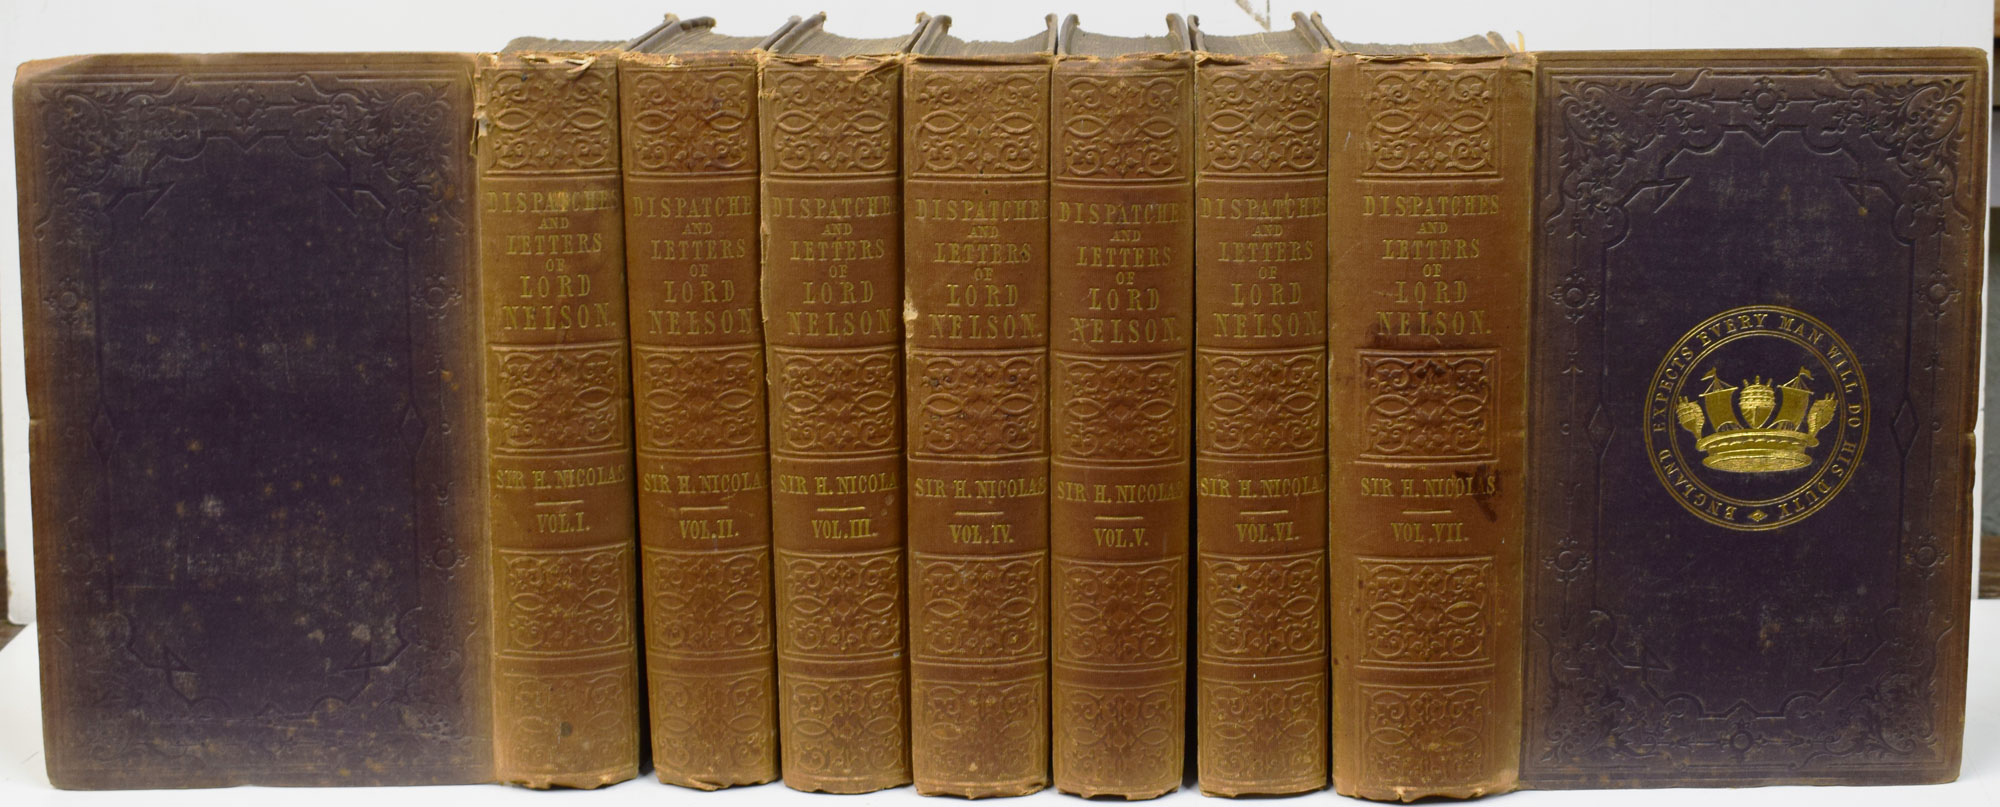 The Dispatches and Letters of Vice Admiral Lord Viscount Nelson. 7 volume set.